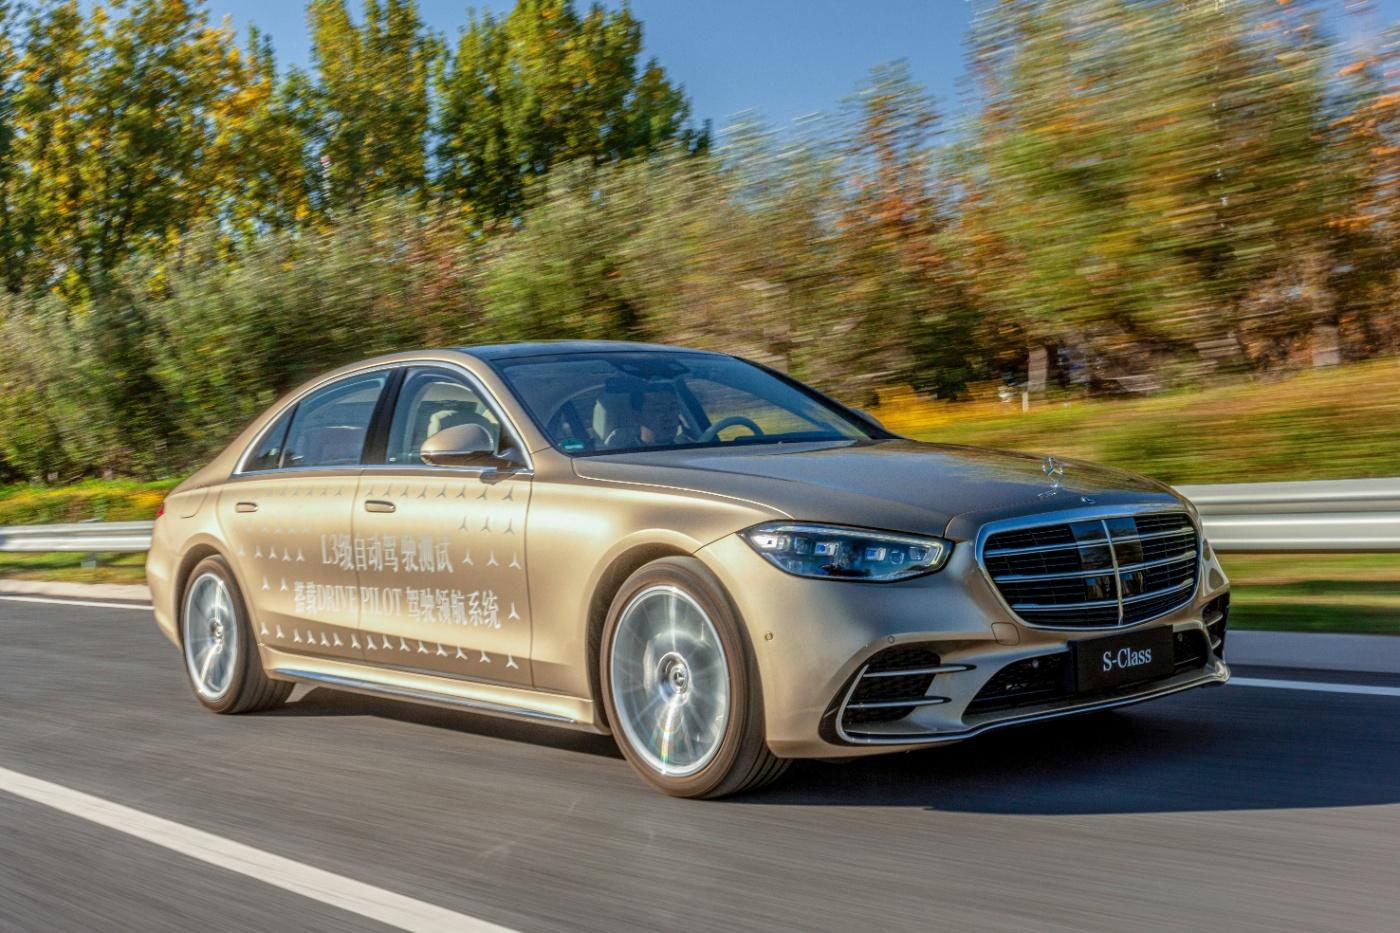 Mercedes-Benz receives official approval to test highly automated driving systems (Level 3) in Beijing.